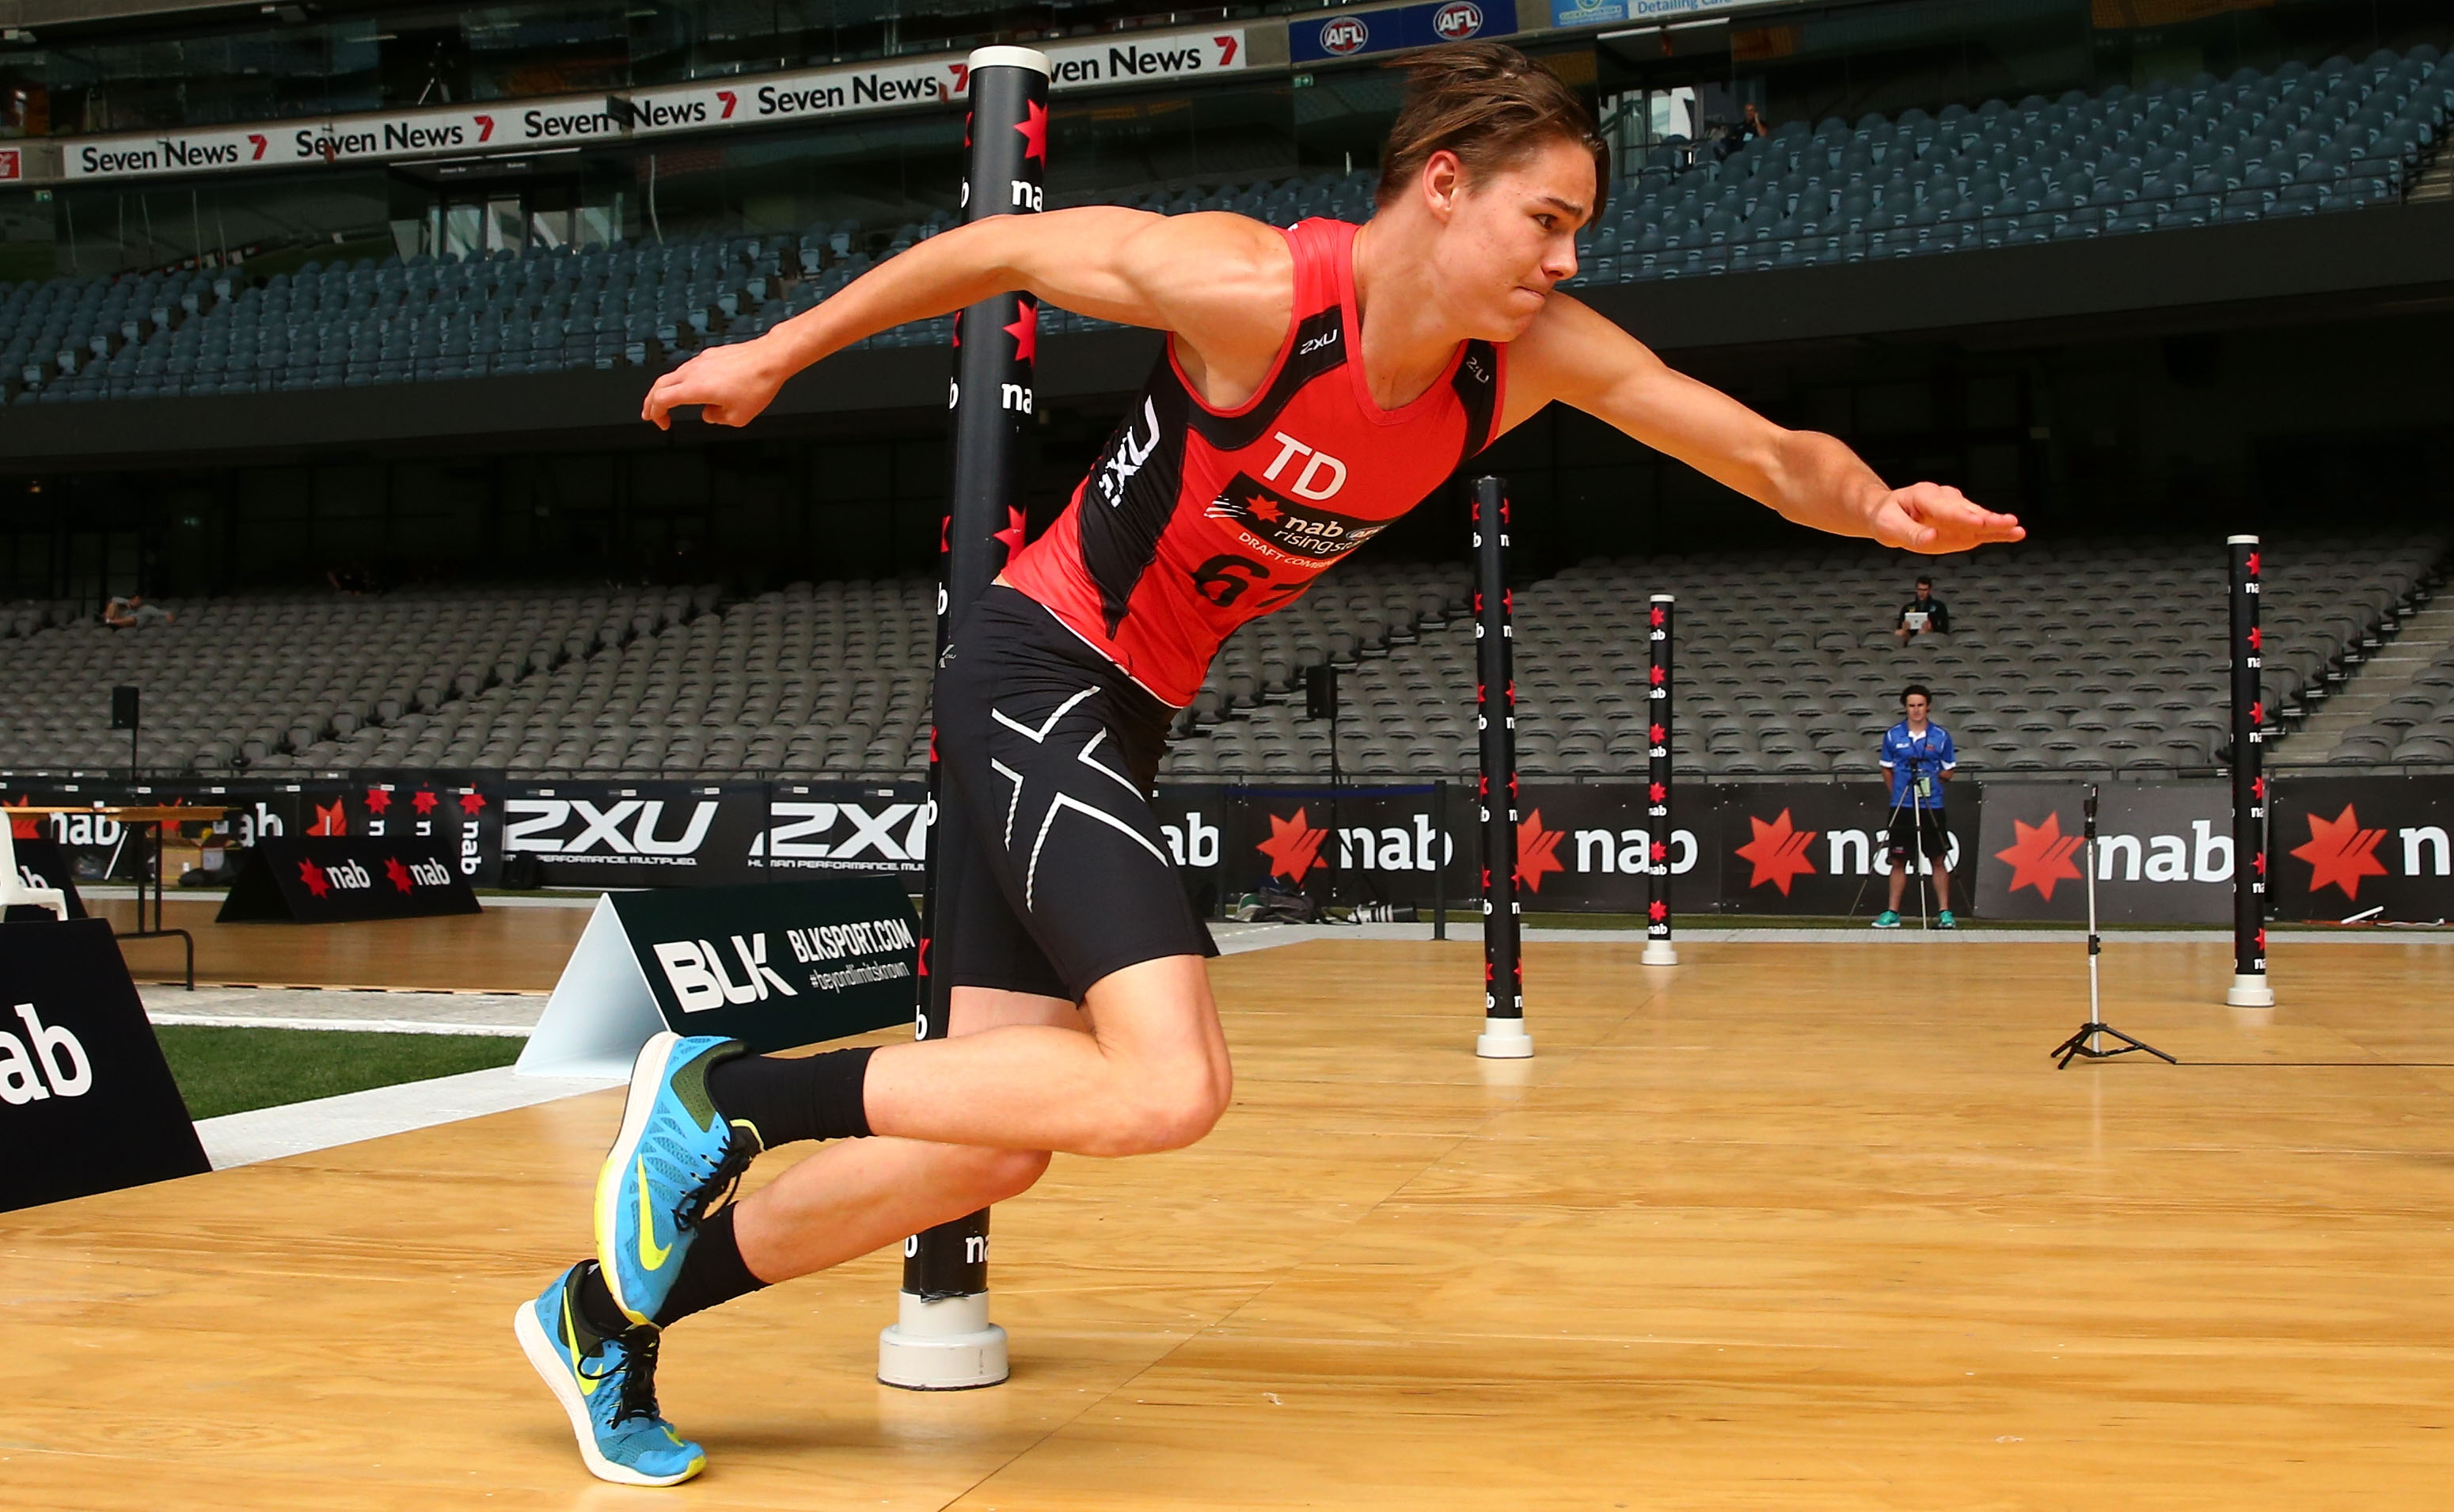 Hipwood takes an agility test during day 2 of the 2015 NAB AFL Draft Combine at Etihad Stadium, Melbourne on October 10, 2015. (Photo by Scott Barbour/Getty Images/AFL Media)